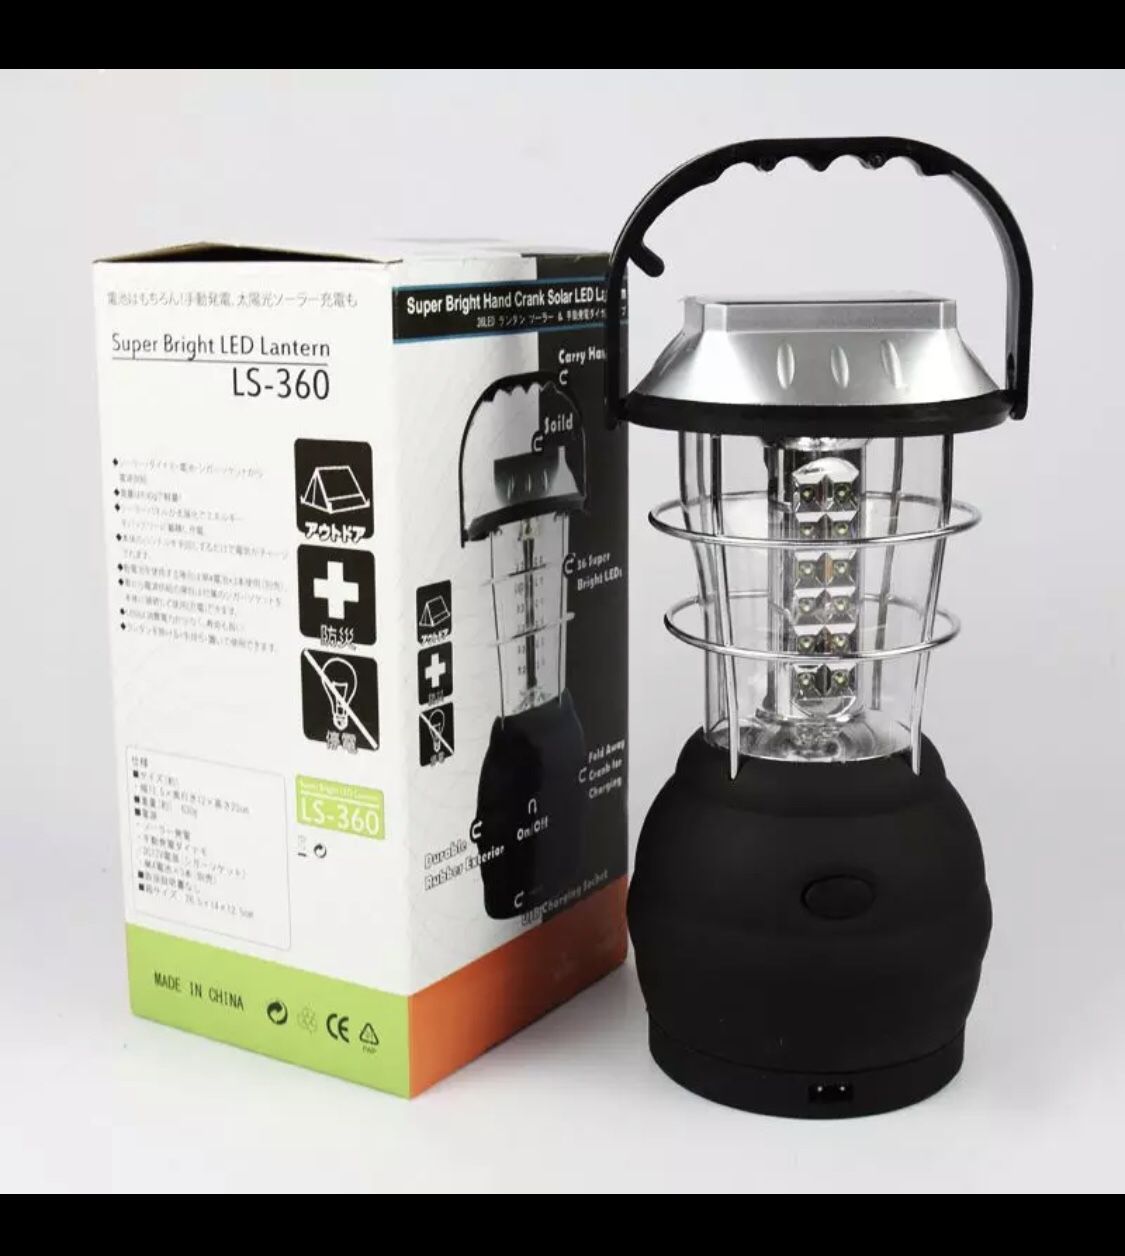 Camping Lantern, Portable High Lumen Outdoor Camping Flashlight Torch Light, Bright Survival Equipment Gear Kit for Emergency, Hiking, Tent, Backpack